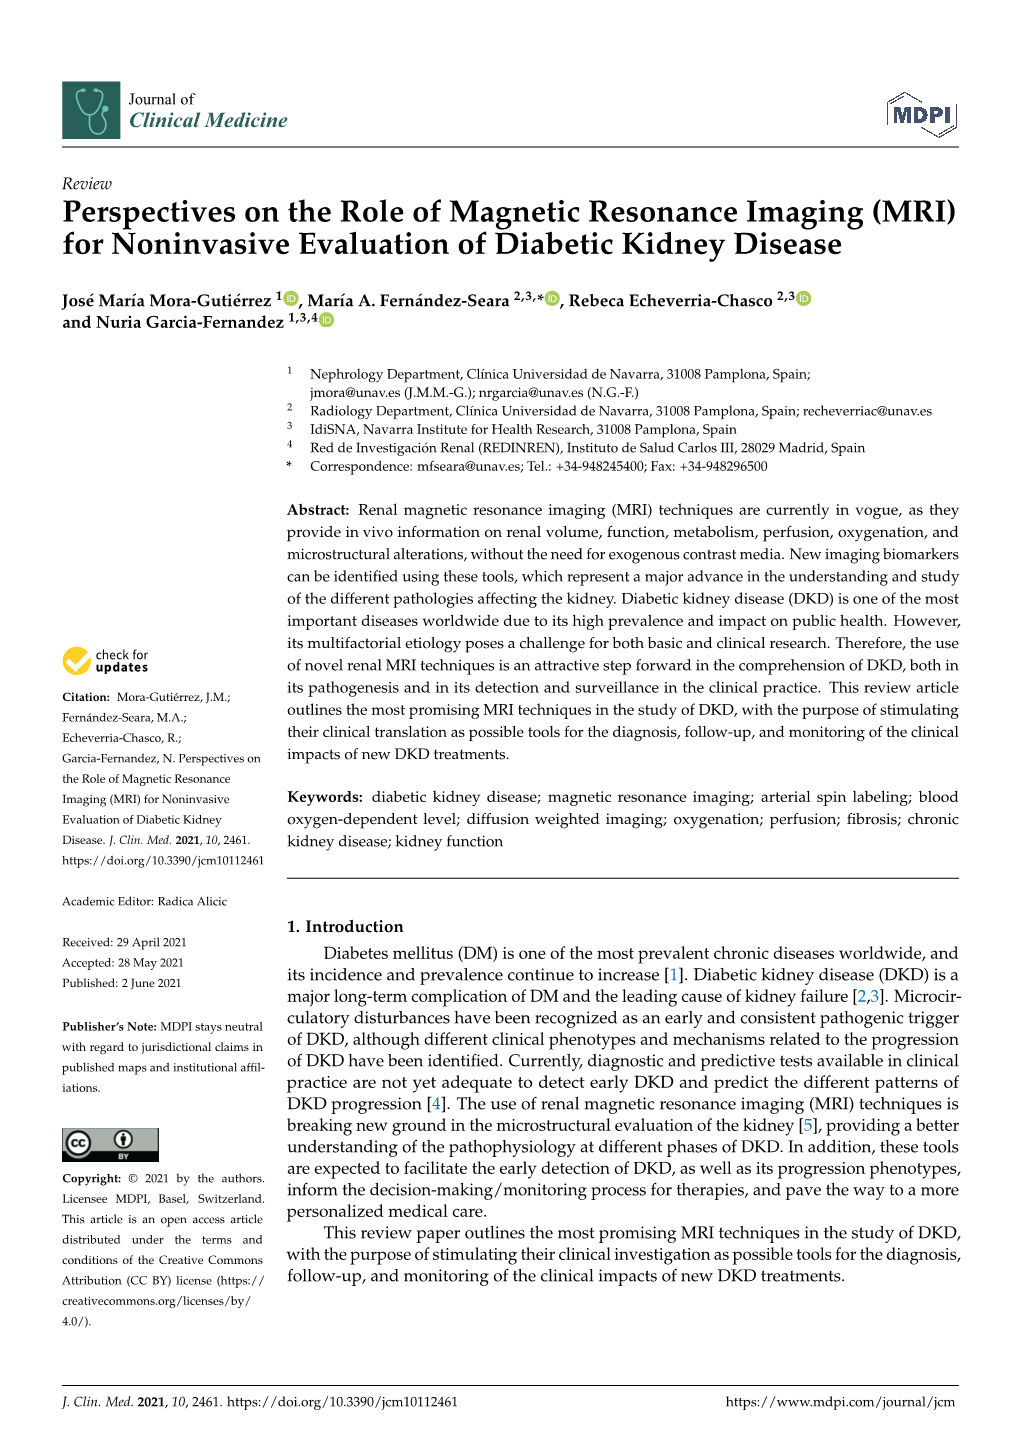 Perspectives on the Role of Magnetic Resonance Imaging (MRI) for Noninvasive Evaluation of Diabetic Kidney Disease